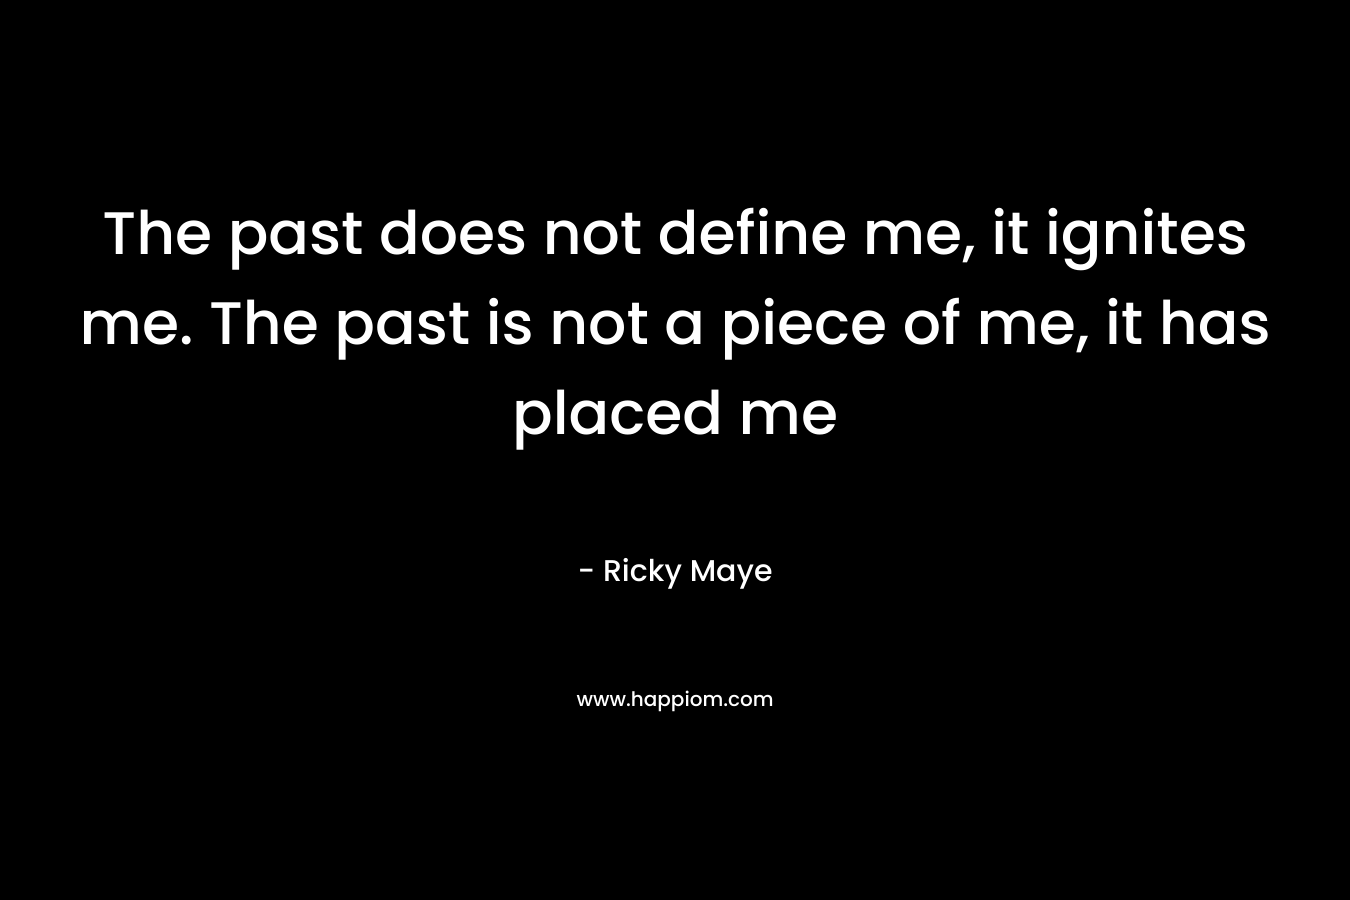 The past does not define me, it ignites me. The past is not a piece of me, it has placed me – Ricky Maye